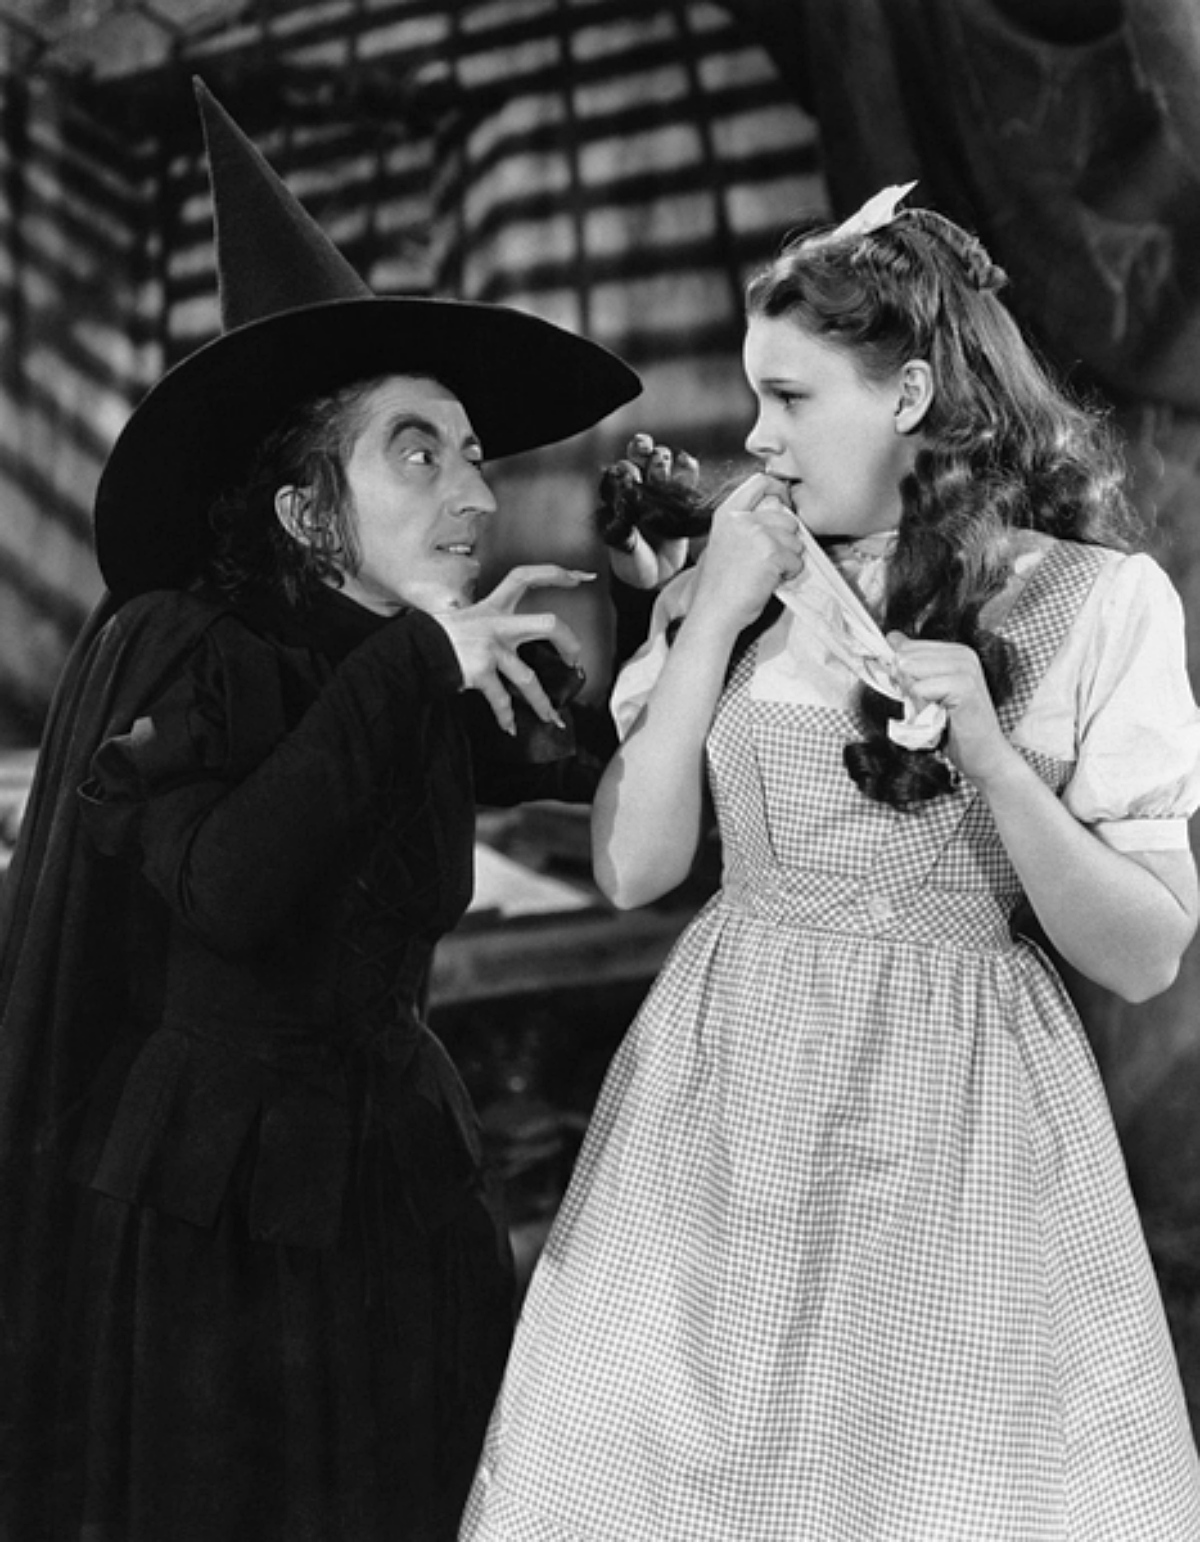 Dorothy and the Wicked Witch of the West